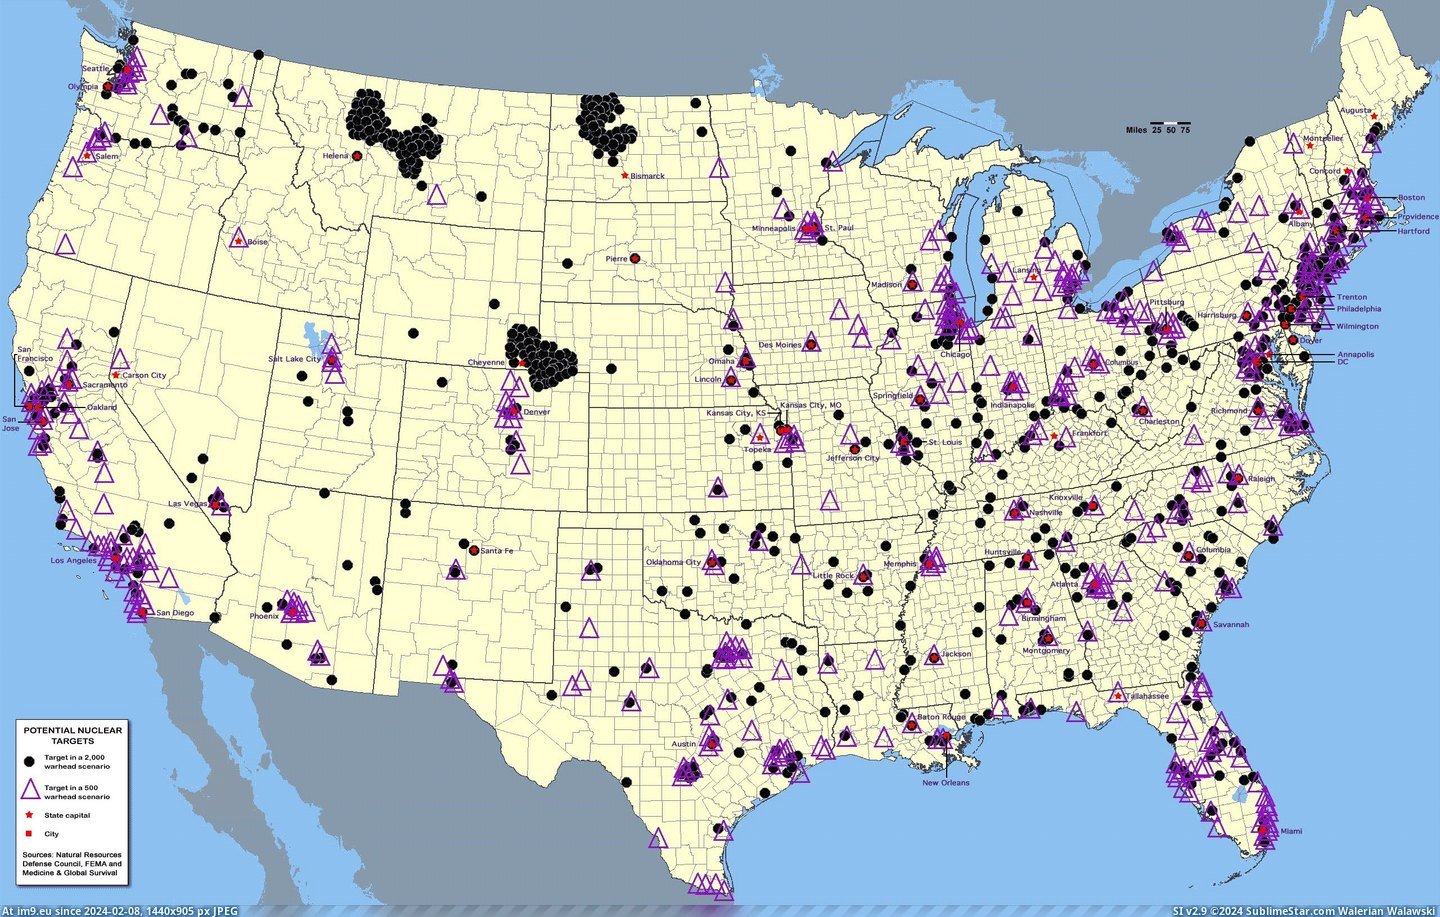 #Map #Potential #Targets #Nuclear #Strikes [Mapporn] A map of potential targets for nuclear strikes on the US [2560x1620] Pic. (Image of album My r/MAPS favs))